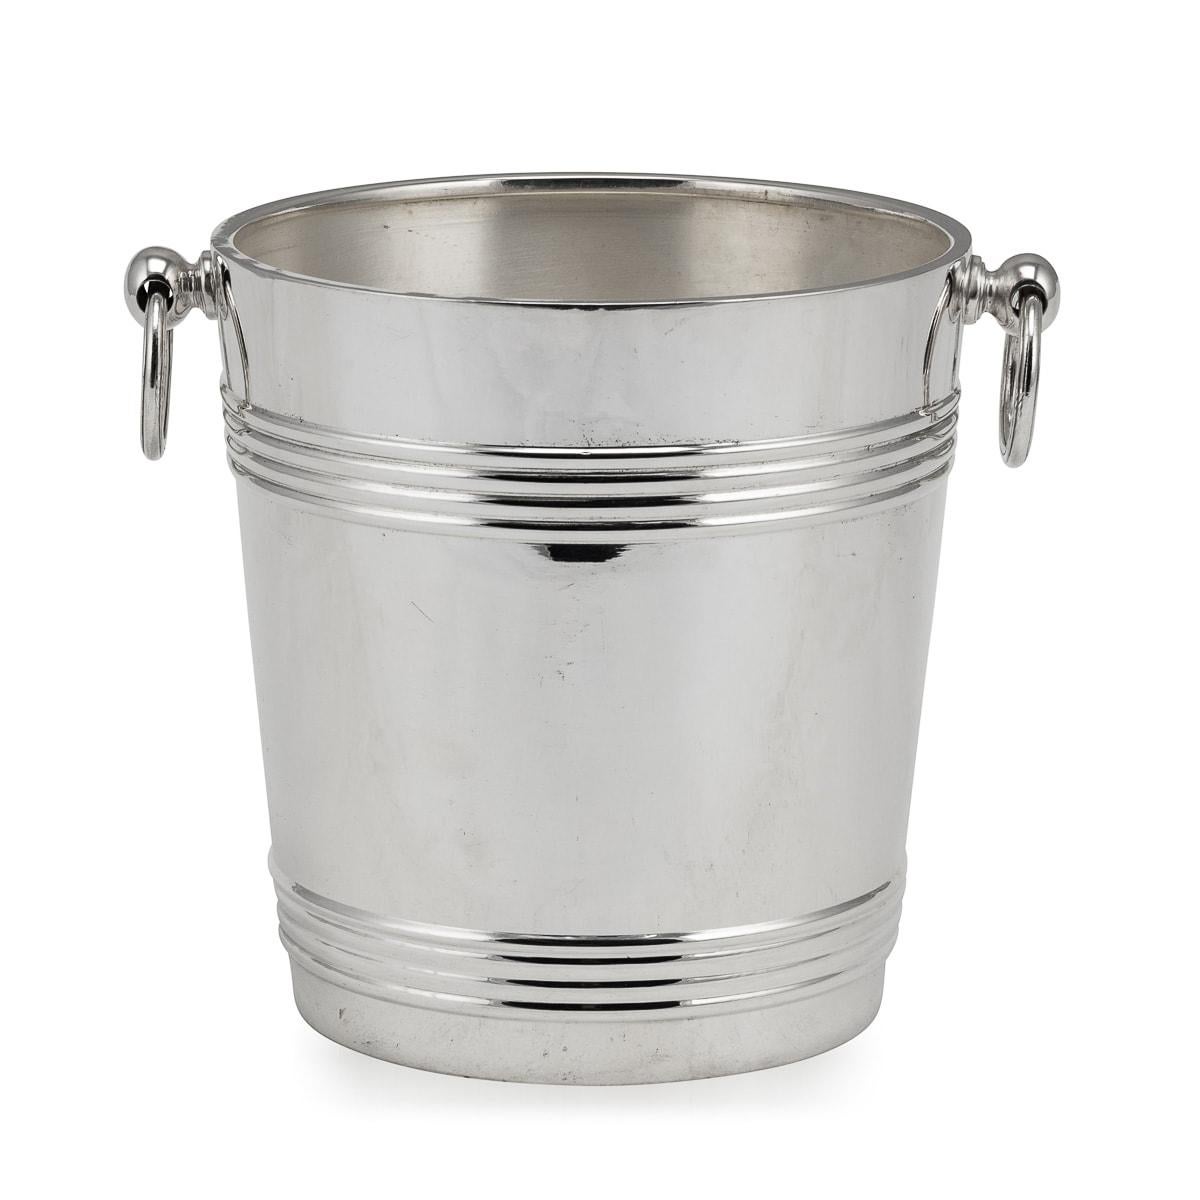 Art Deco 20th Century French Silver Plated Wine Cooler By Christofle For Sale